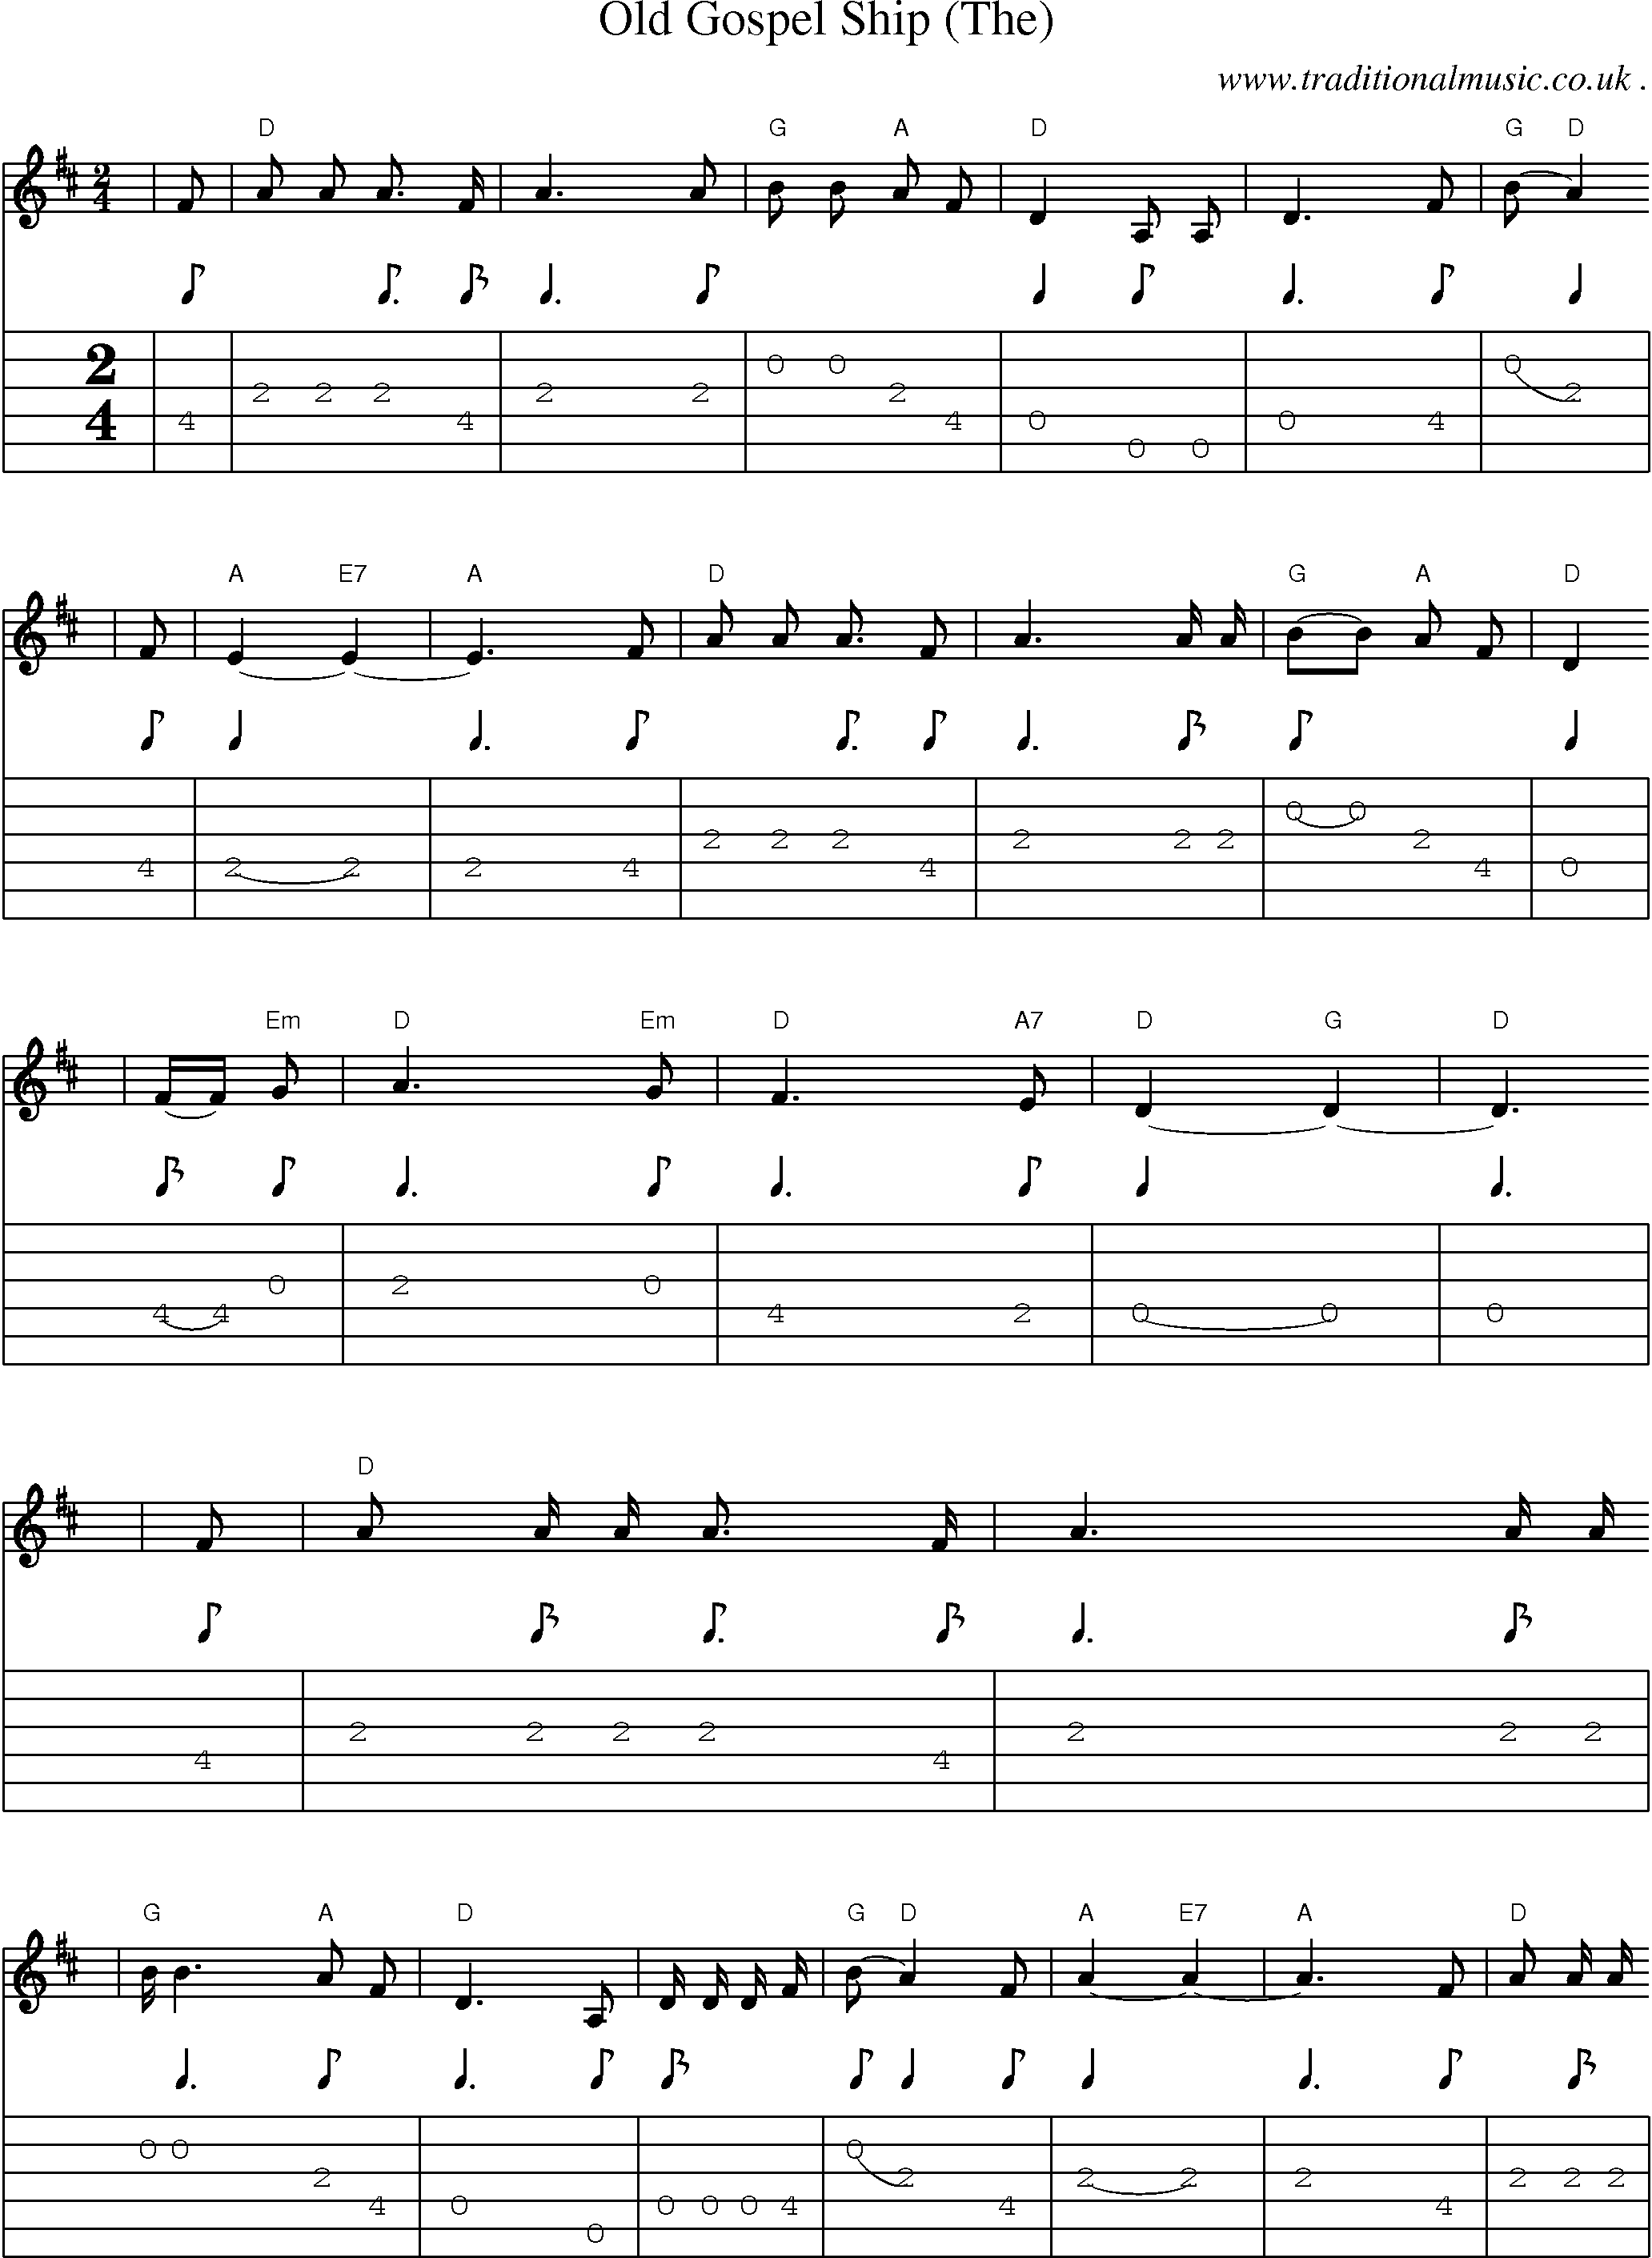 Music Score and Guitar Tabs for Old Gospel Ship (the)